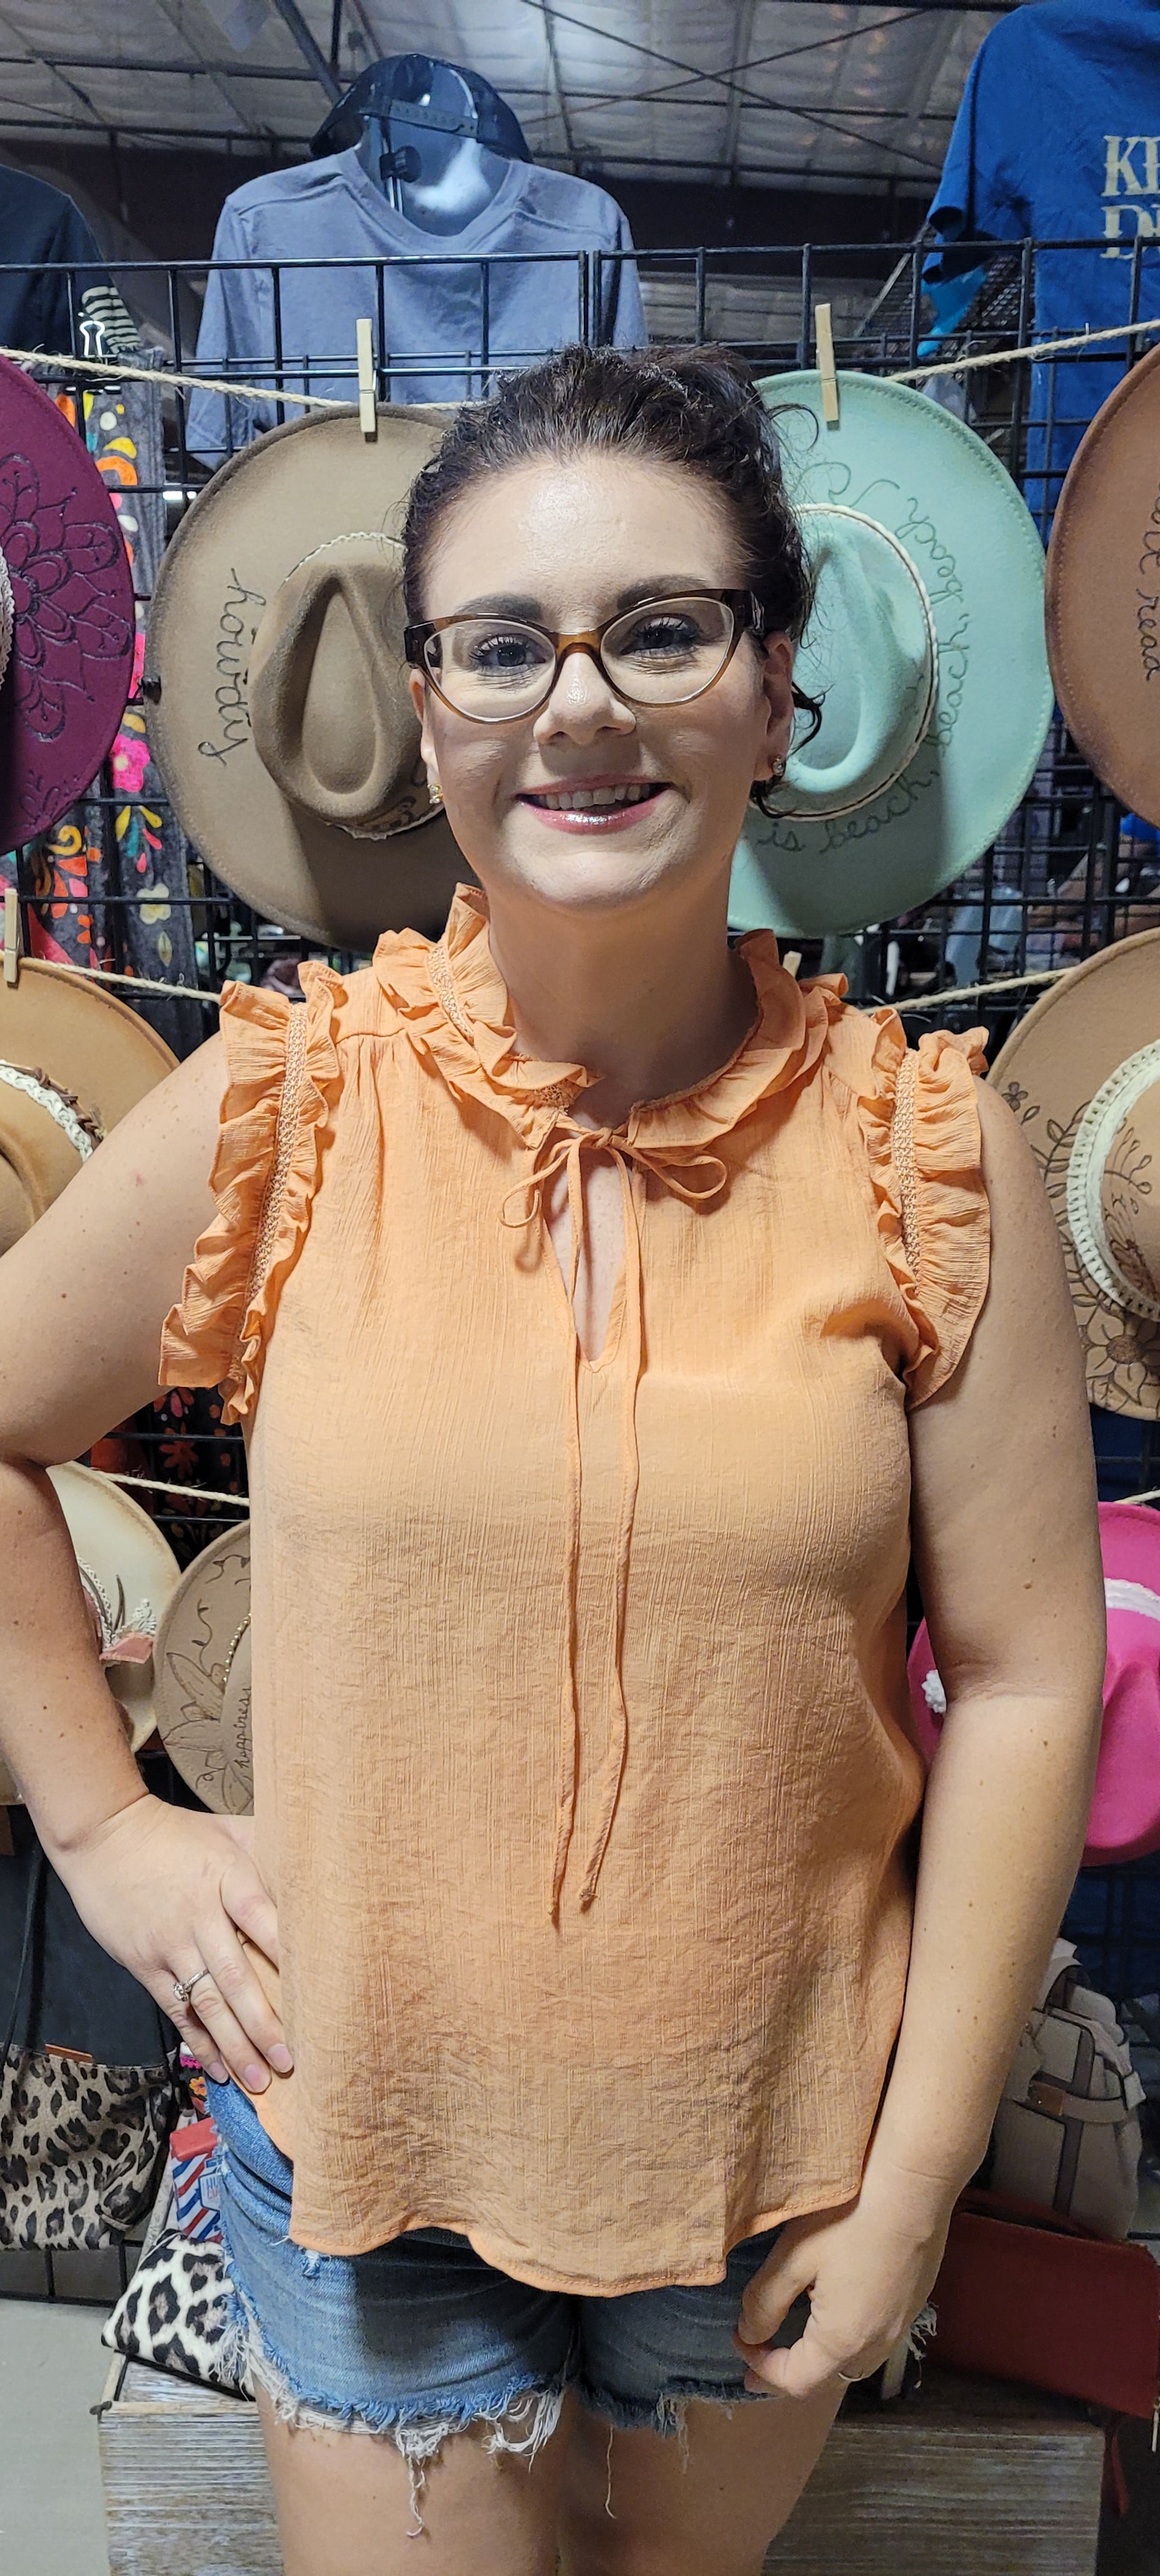 Make a splash this summer with this "Fun In The Sun Dusty Apricot" top! Indulge in the split neckline with self tie, and dance the day away with the ruffles and lace detail that flutter along the neck and arm openings. Time to unleash your carefree summer spirit! Sizes small through large.